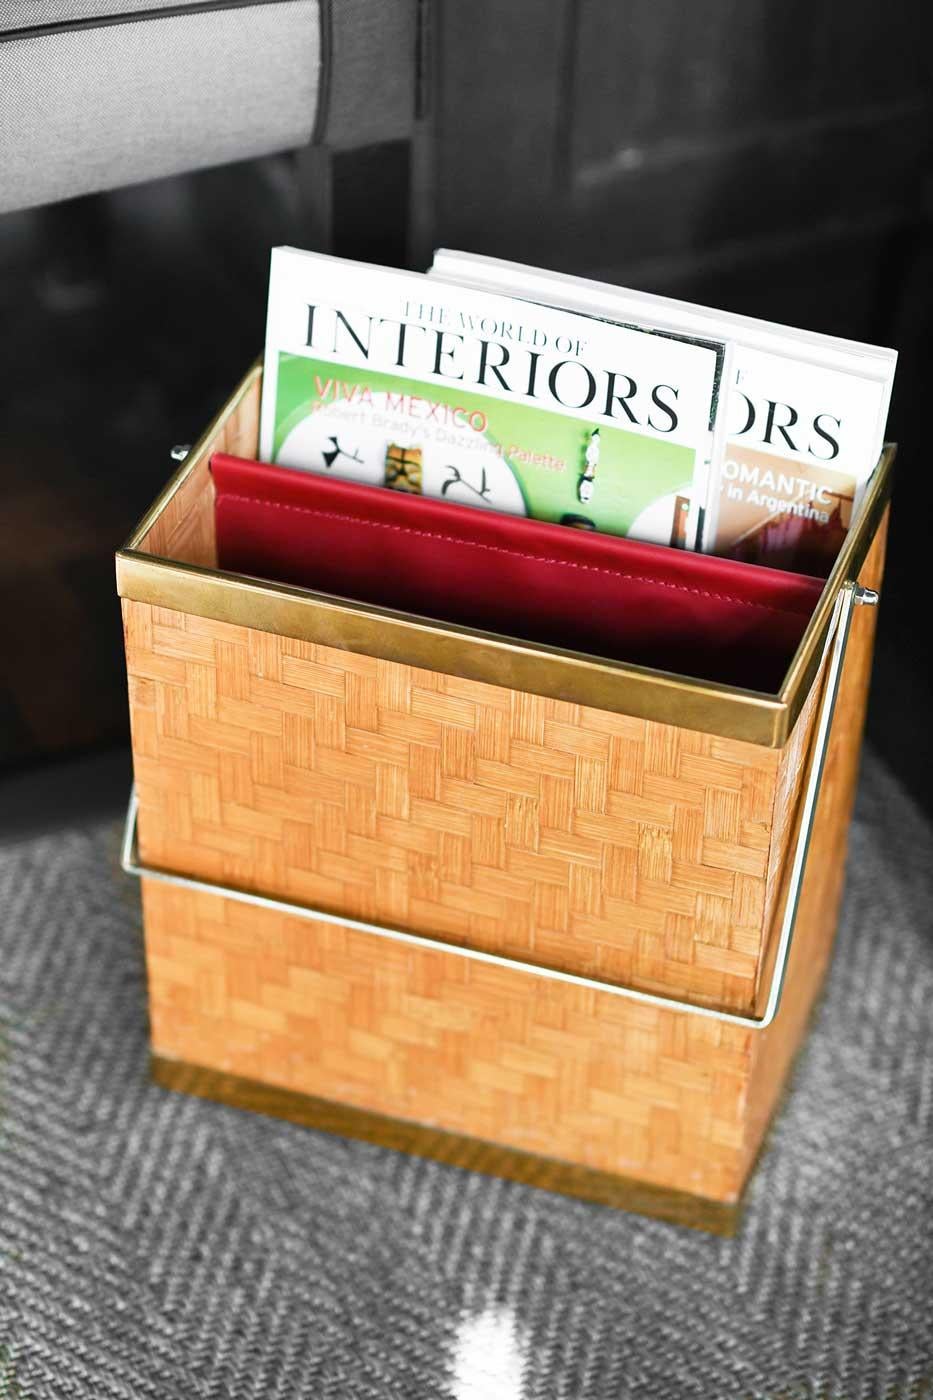 Bamboo magazine rack with brass details and internal divider. Italian production 1980.
Product details
Dimensions: 30w x 32h x 20d cm
Materials: bamboo, brass, fabric.
Production: Italian manufacture 1980.